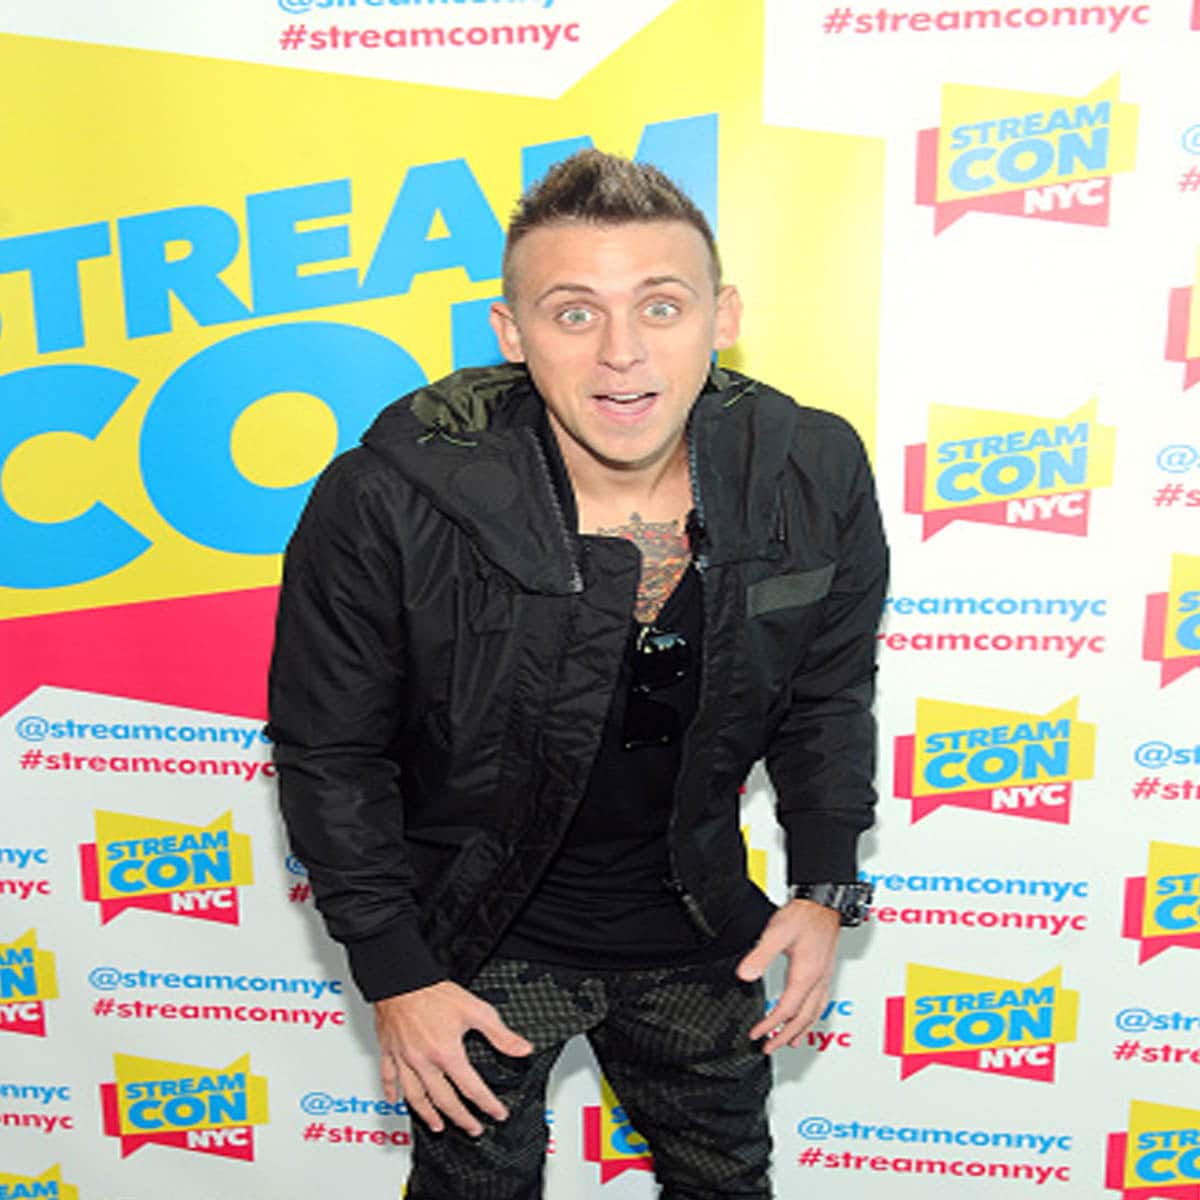 youtuber roman atwood attends stream con nyc 2015